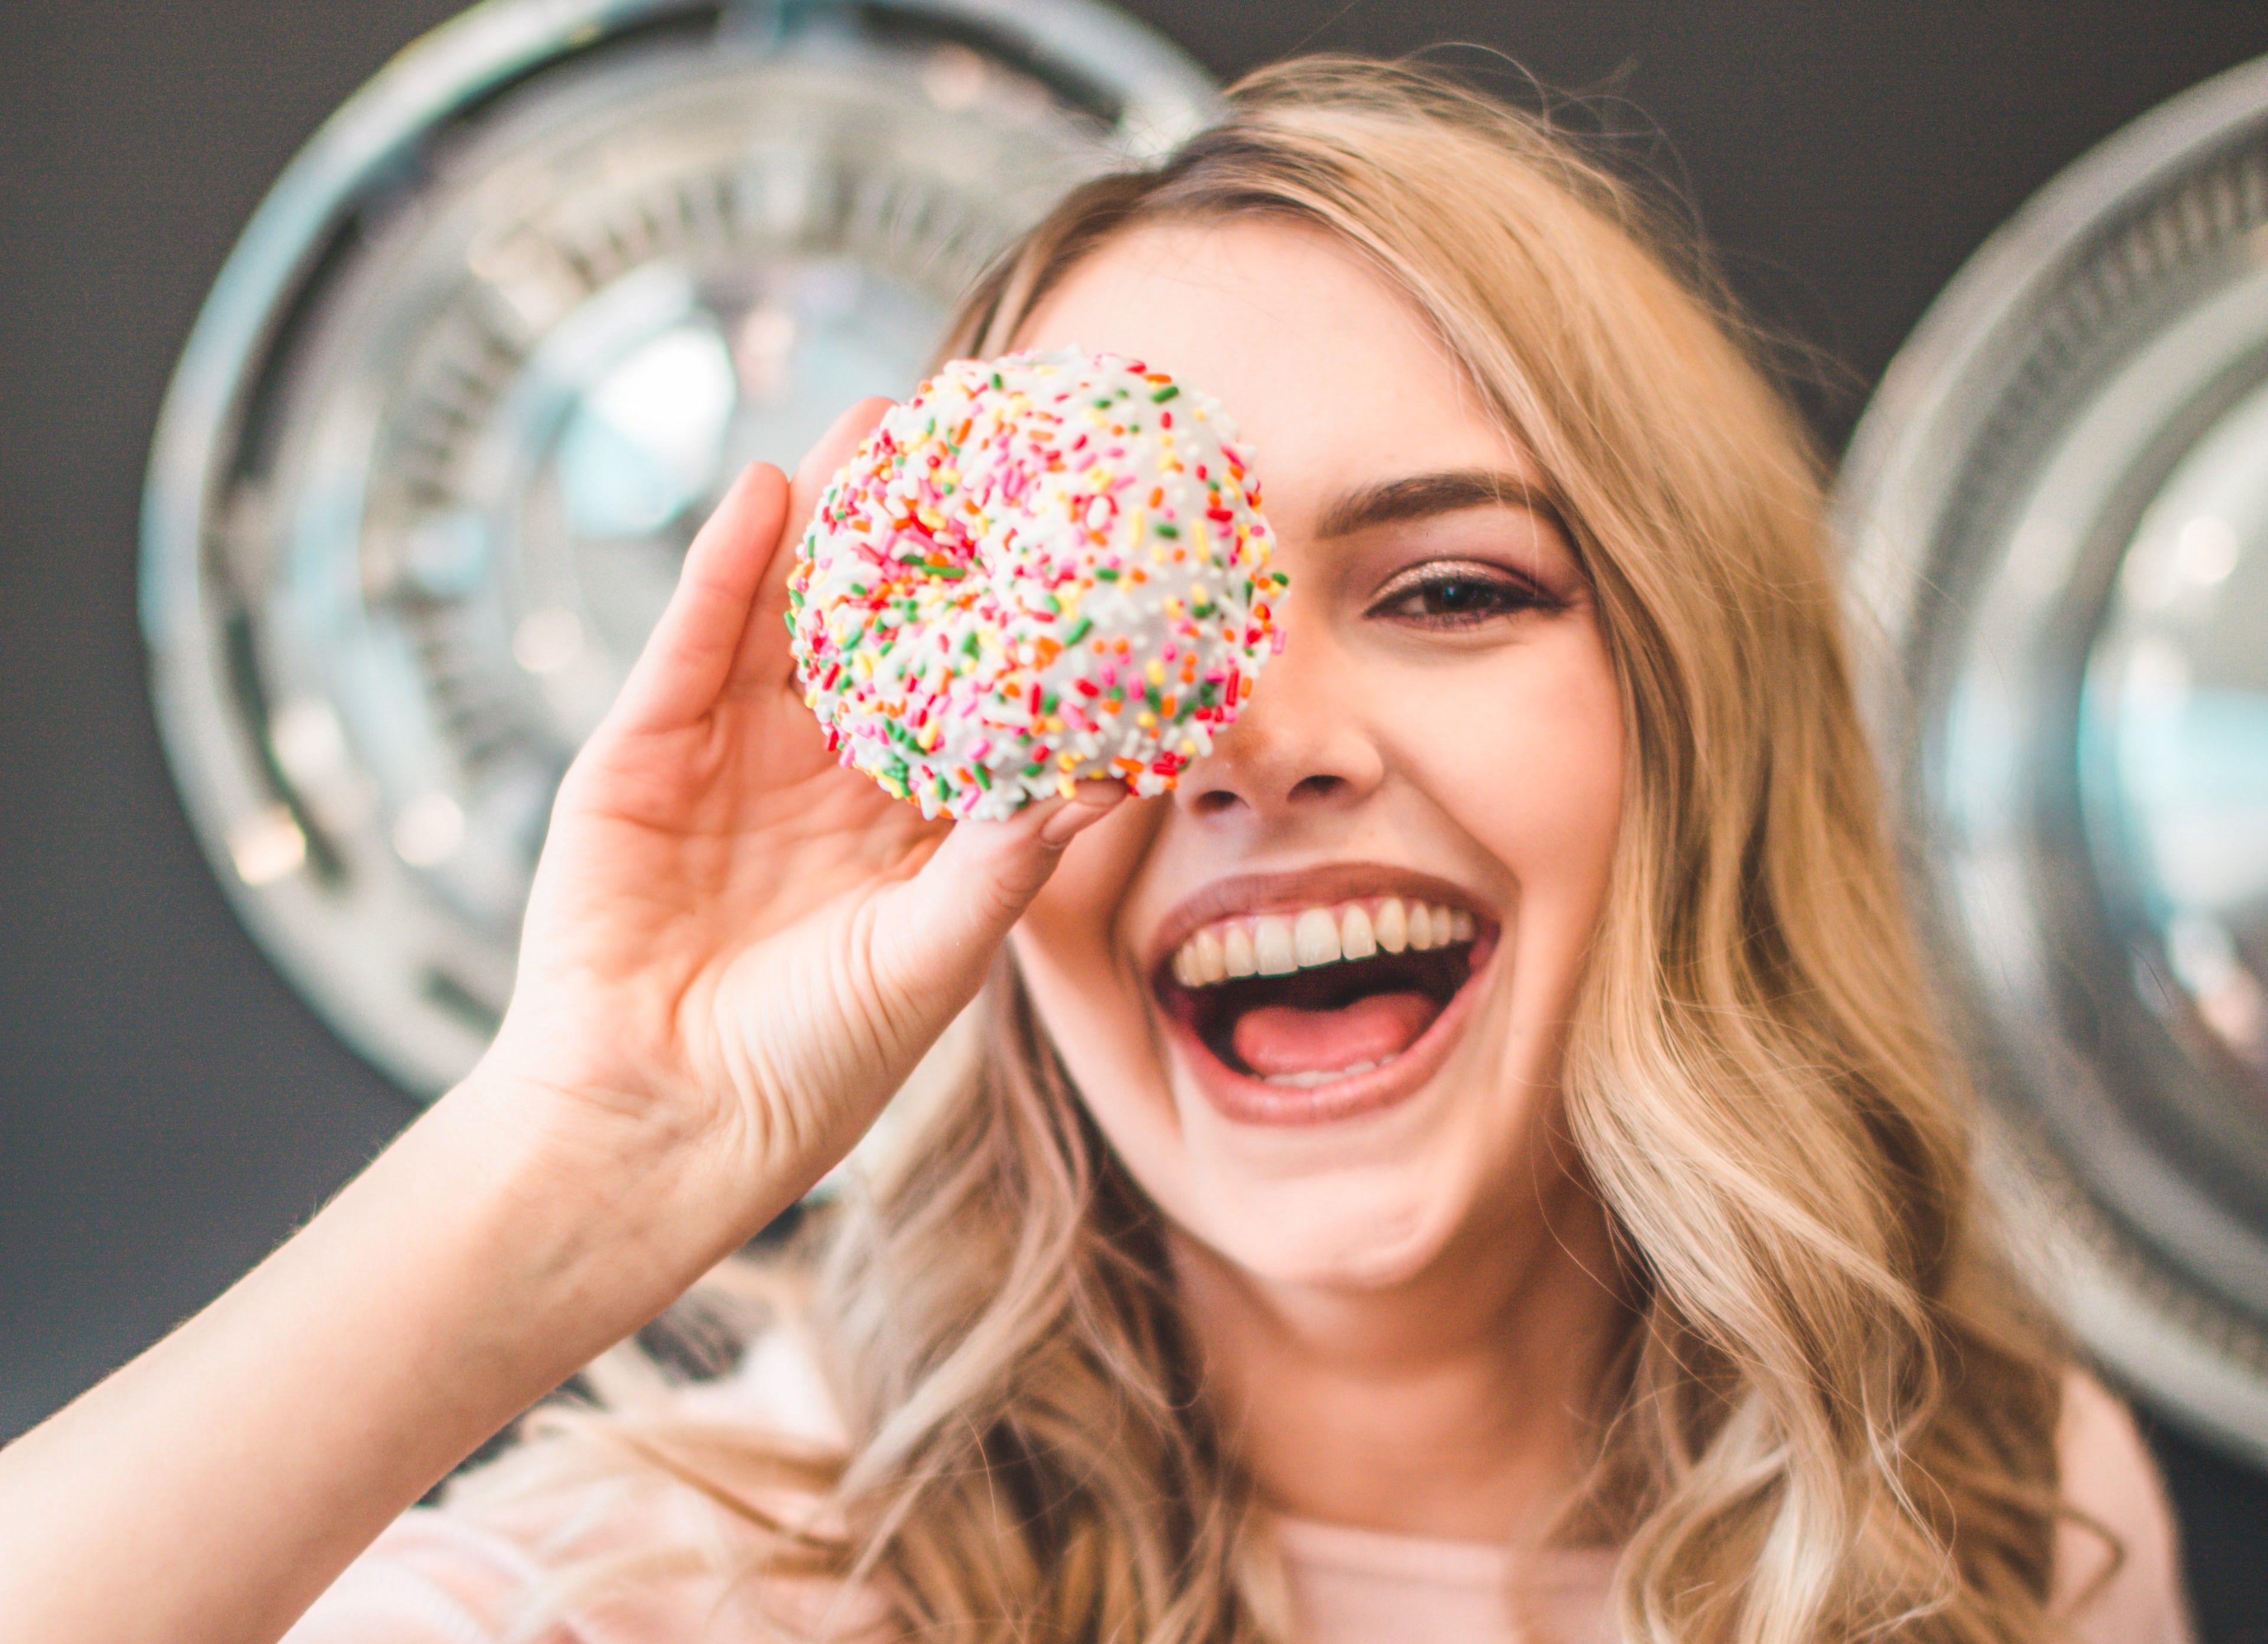 Woman Smiling With Donut